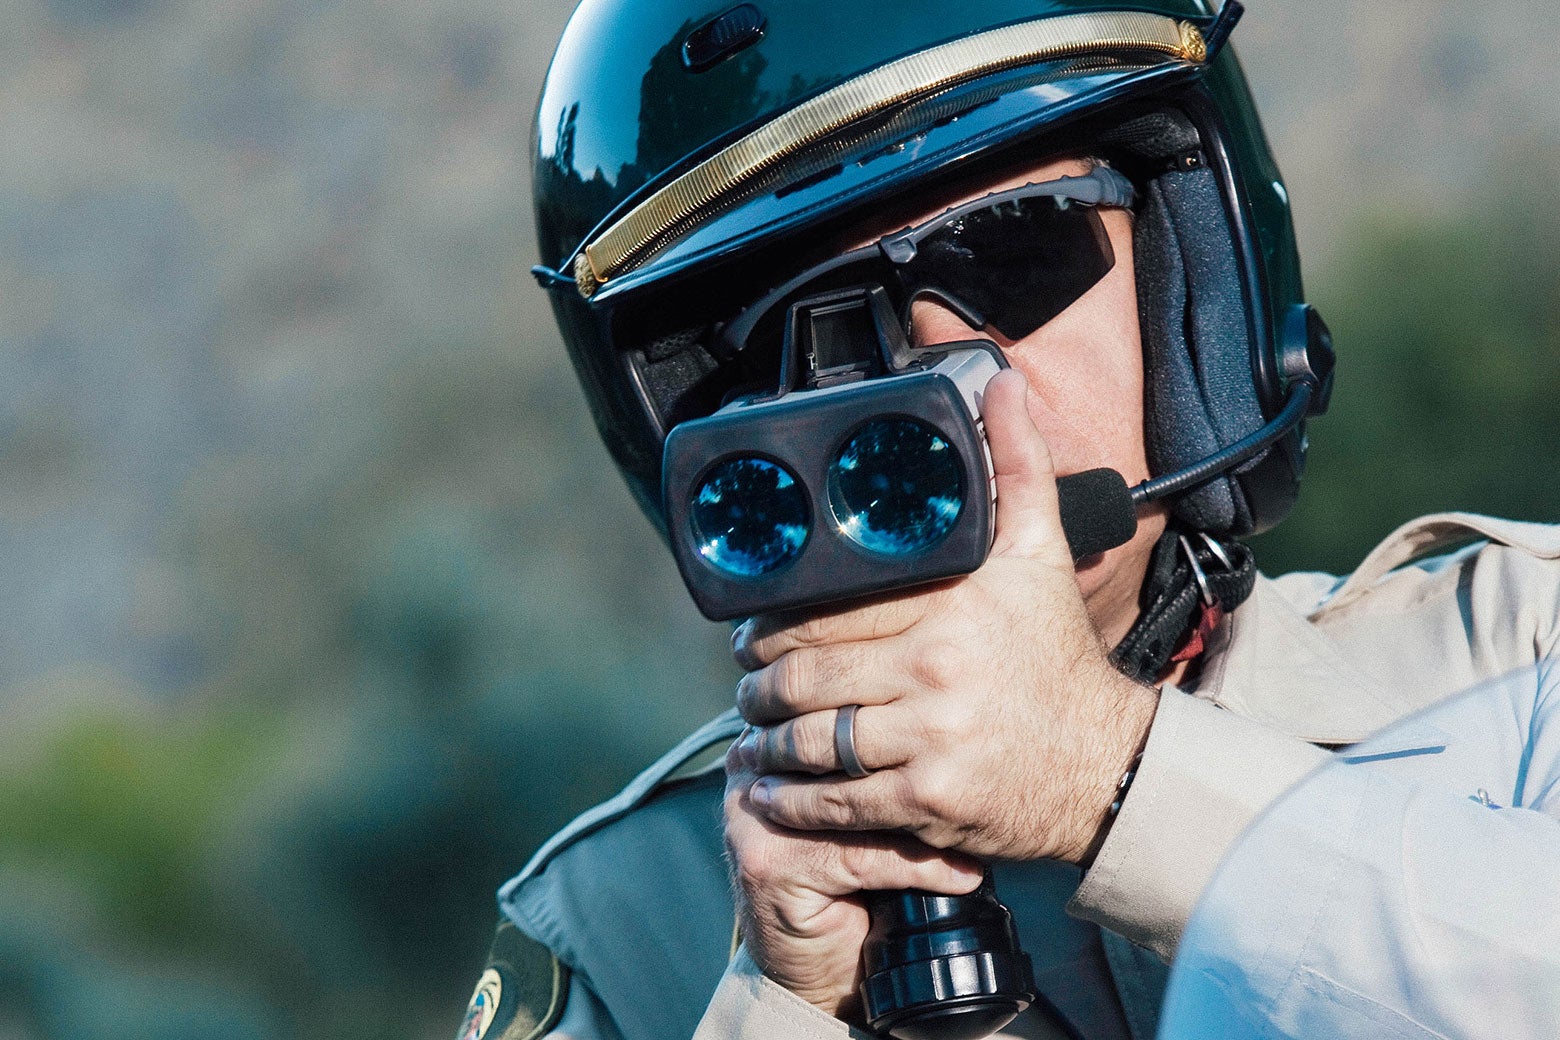 A law enforcement officer looks into a camera or radar device.